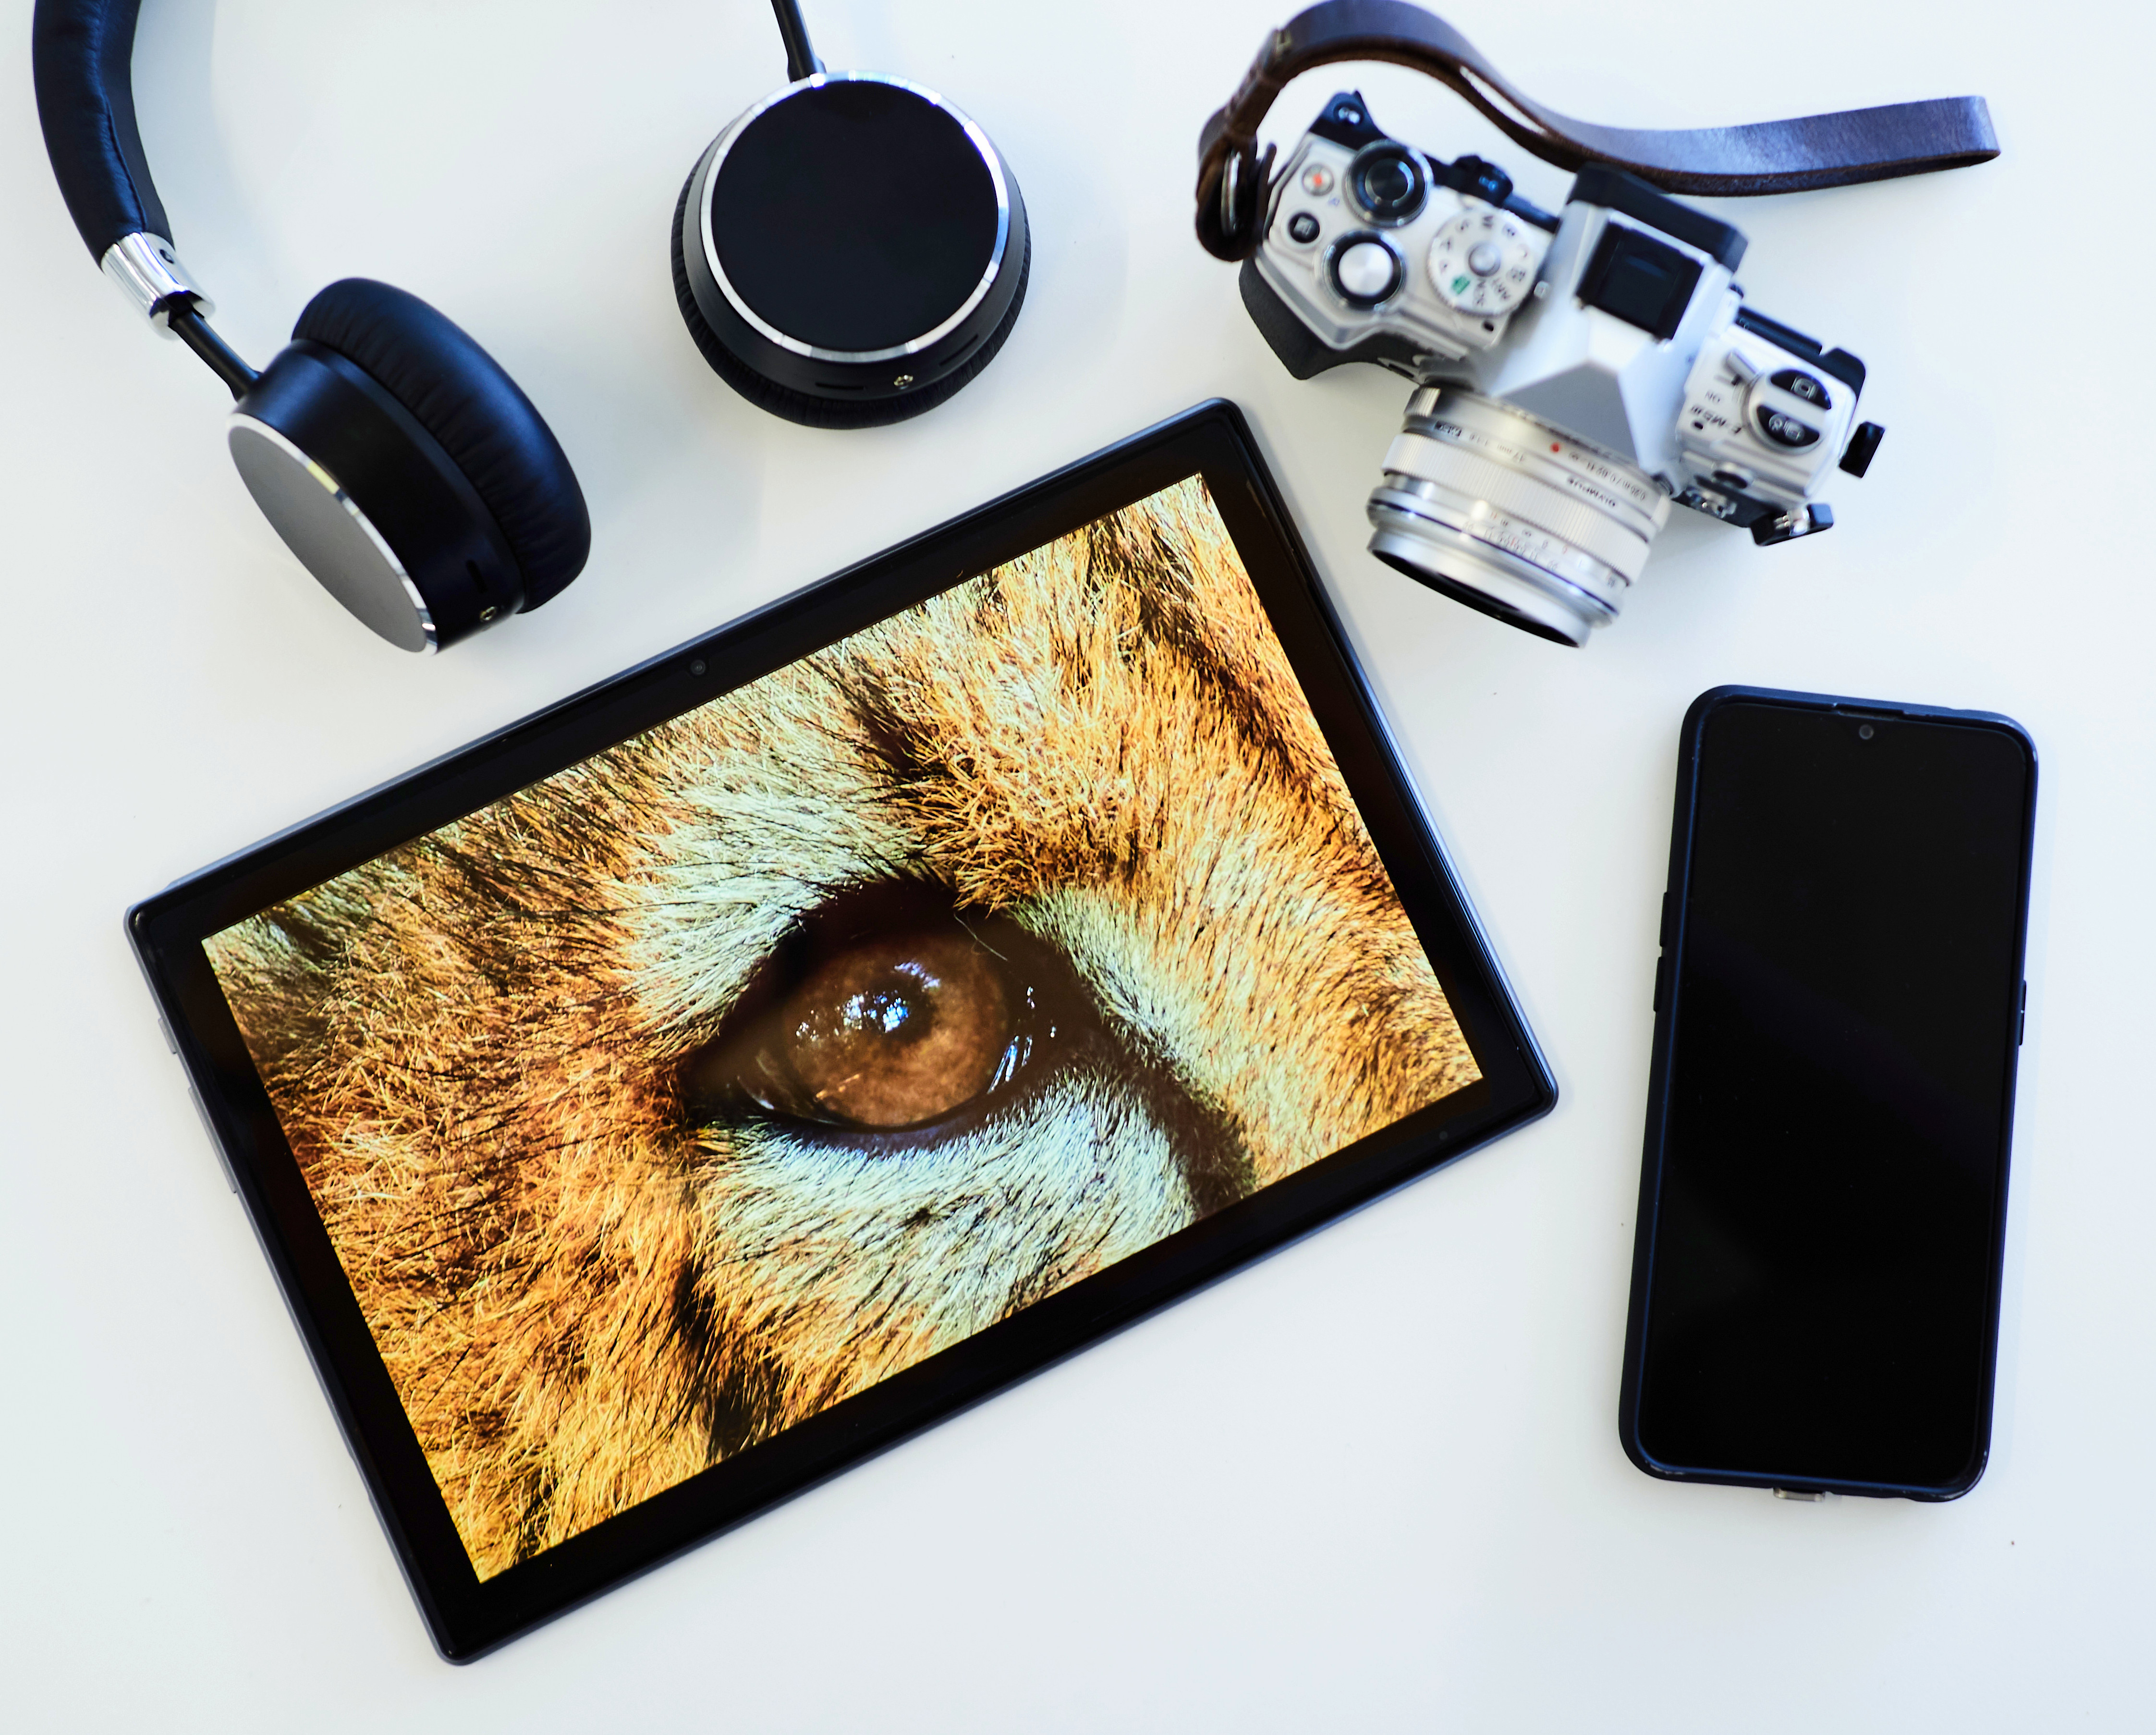 Teclast P20HD Review - Best Budget Tablet Under $130 in 2020